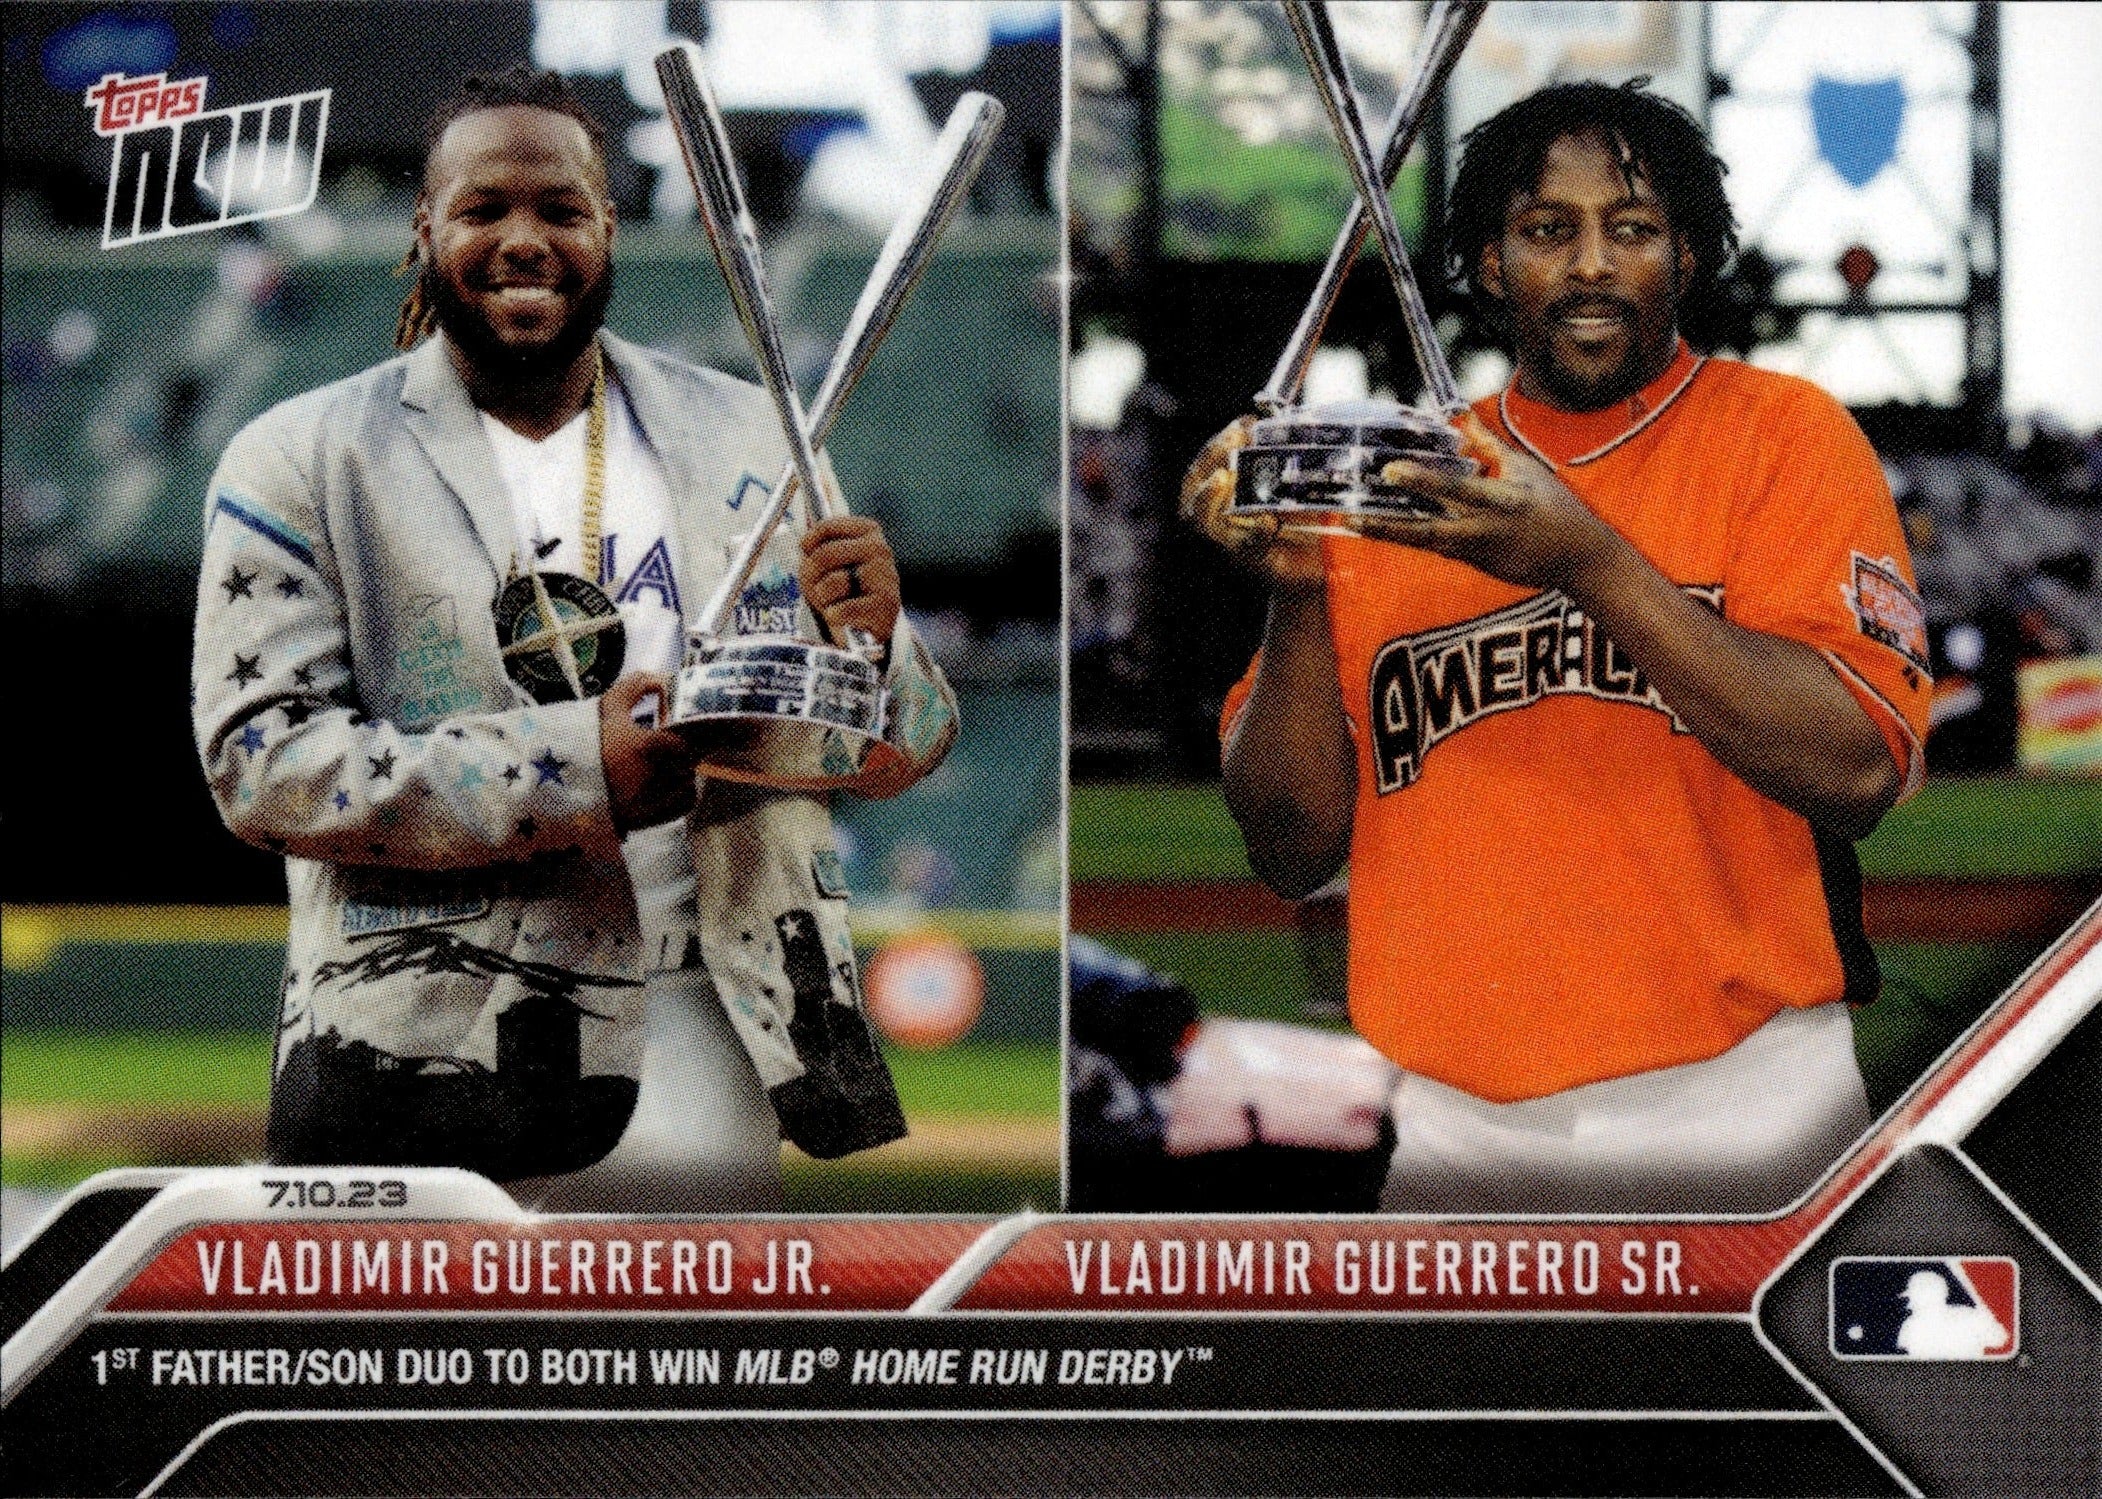 2023 Vladimir Guerrero Jr. & Sr. Topps Now 1ST FATHER/SON DUO TO BOTH